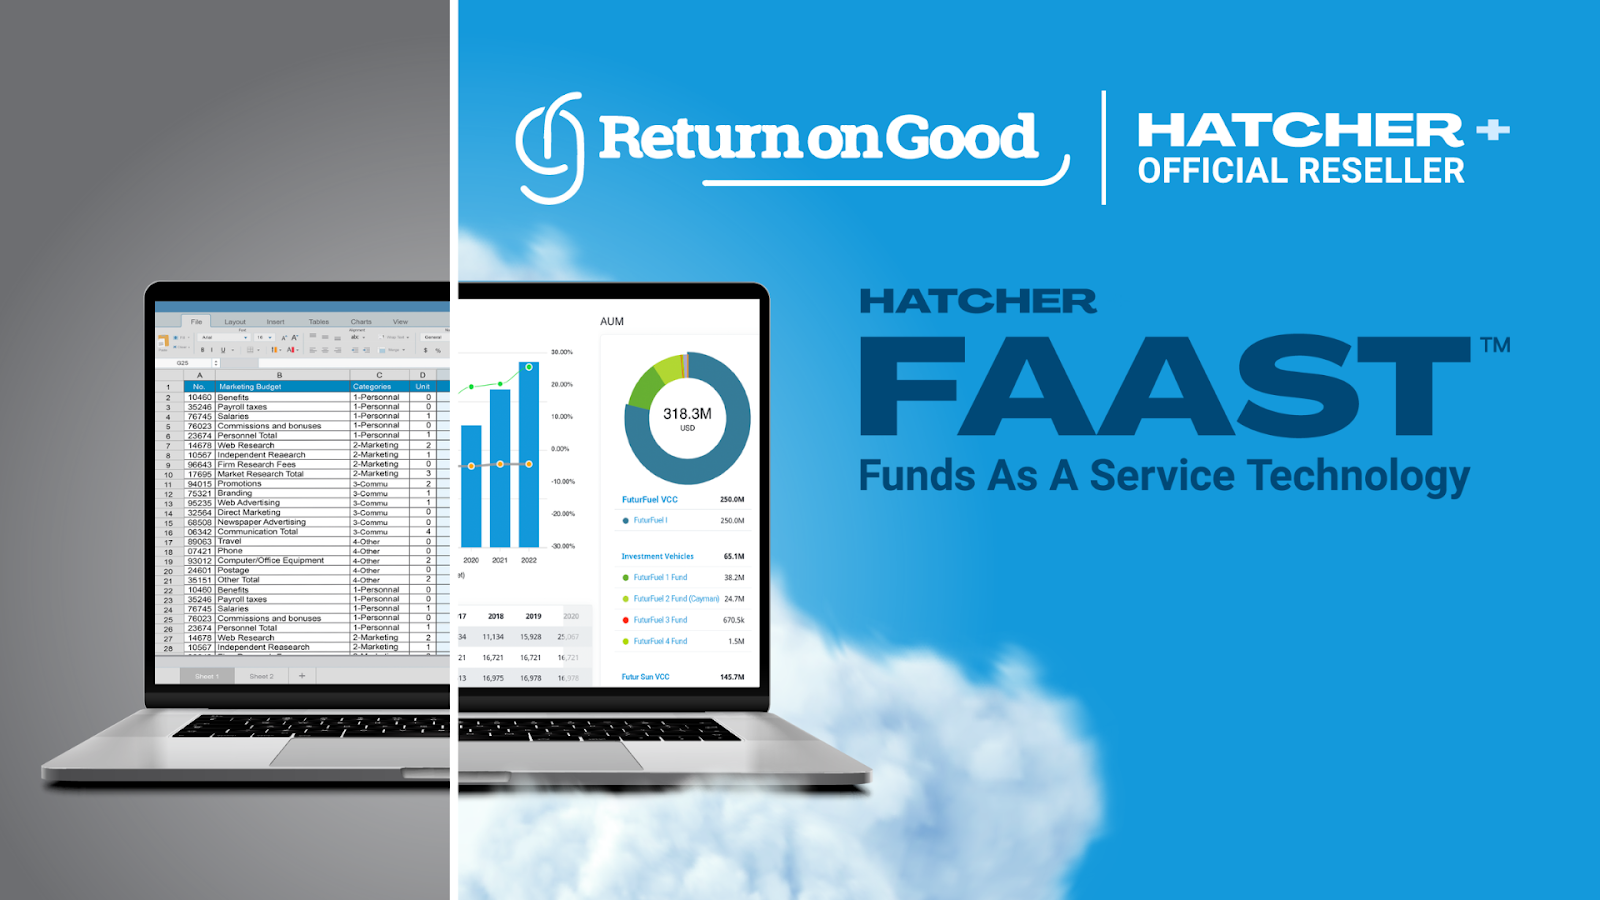 Hatcher+ Announces New Reseller with Return on Good